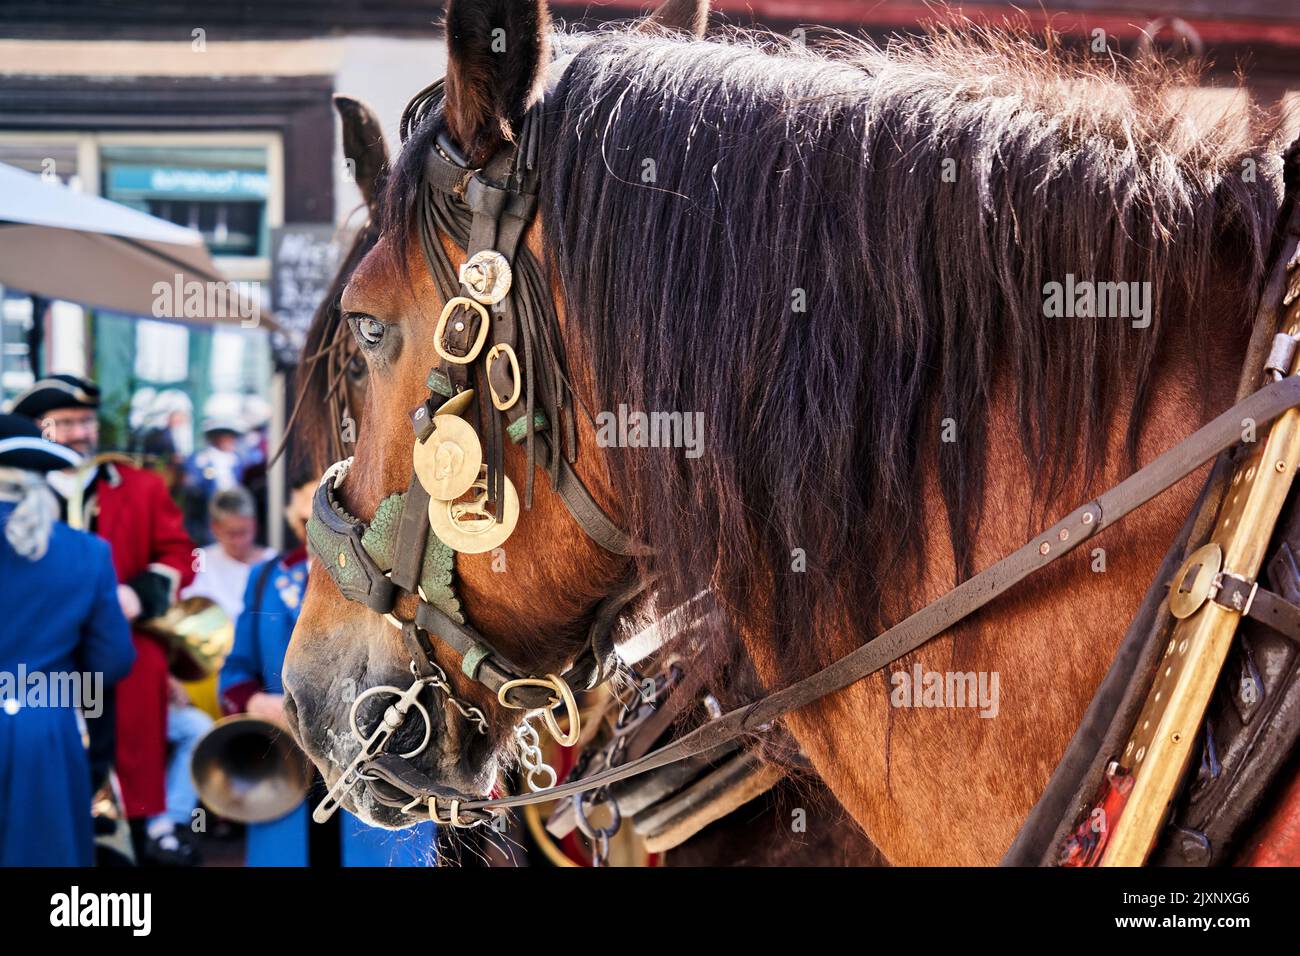 Head of a horse with richly decorated harness and festive heavy bridle Stock Photo